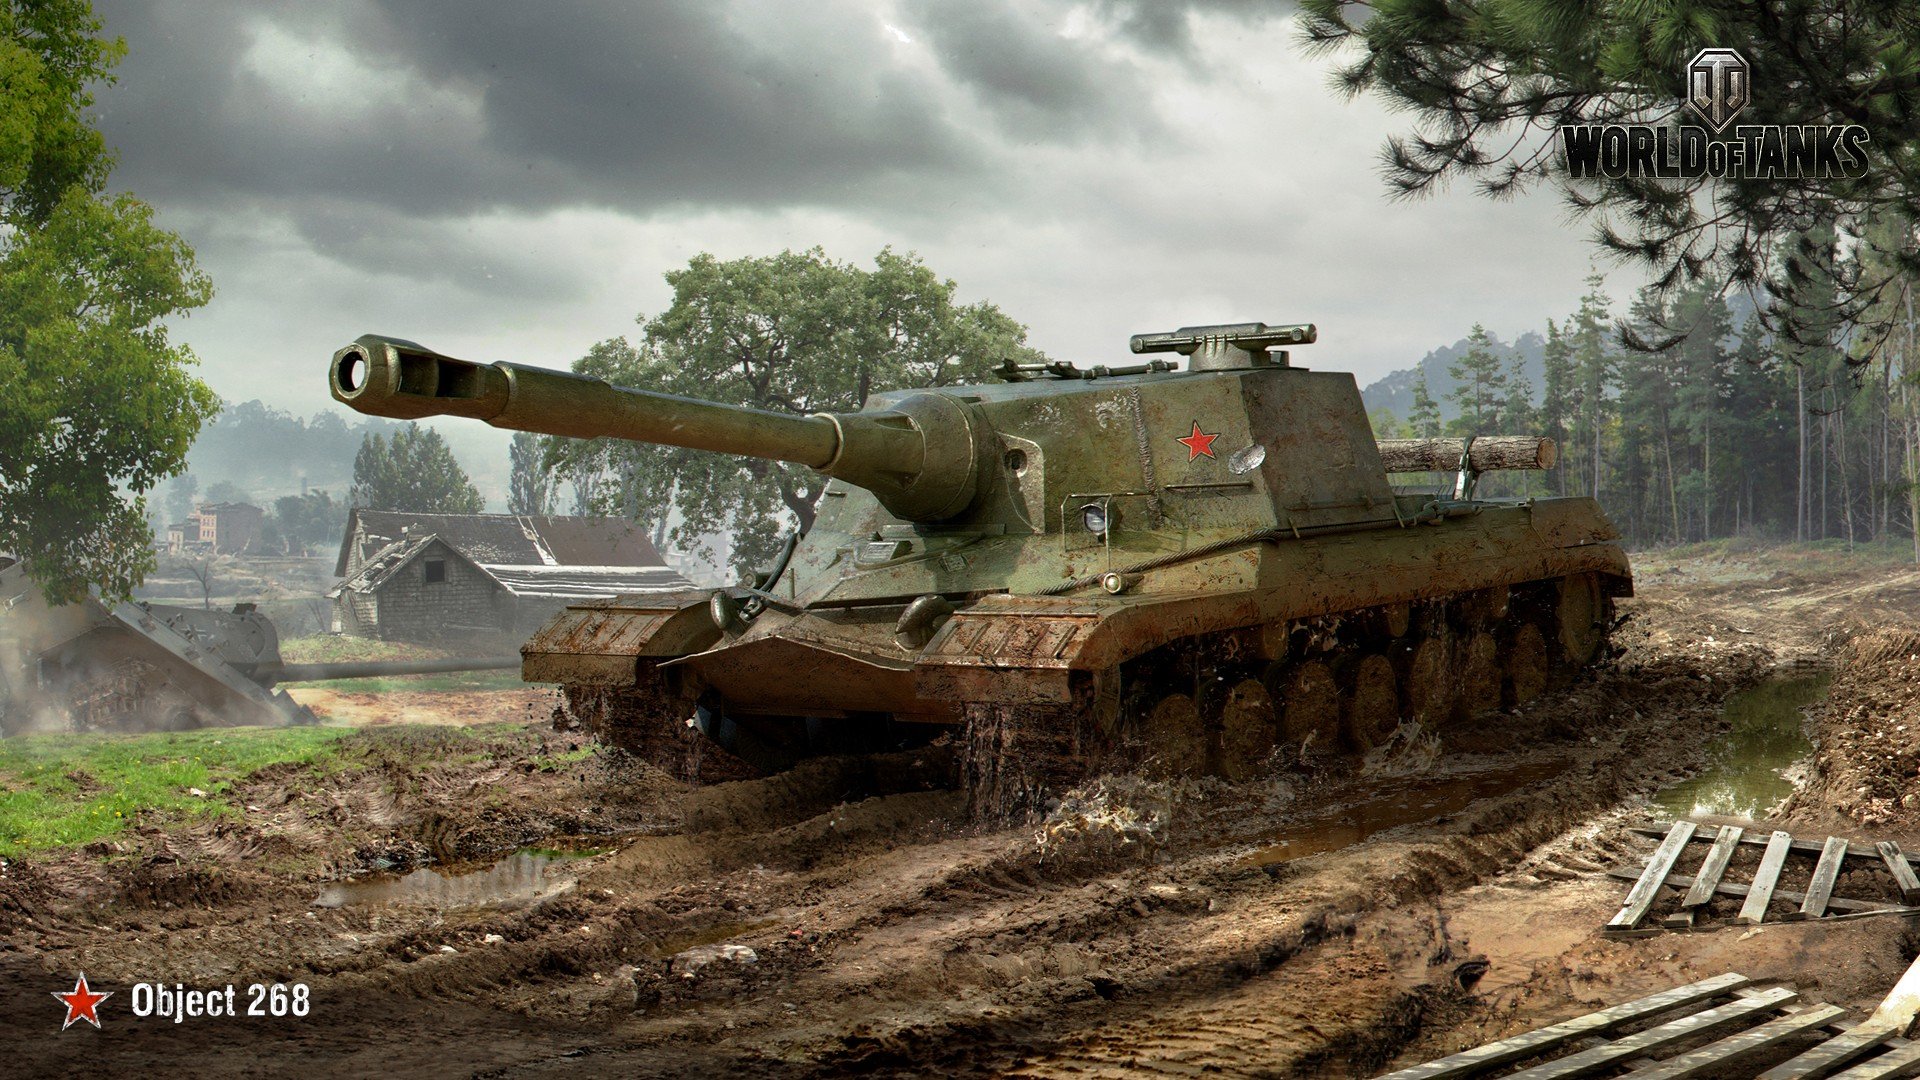 instal the last version for ios World of War Tanks